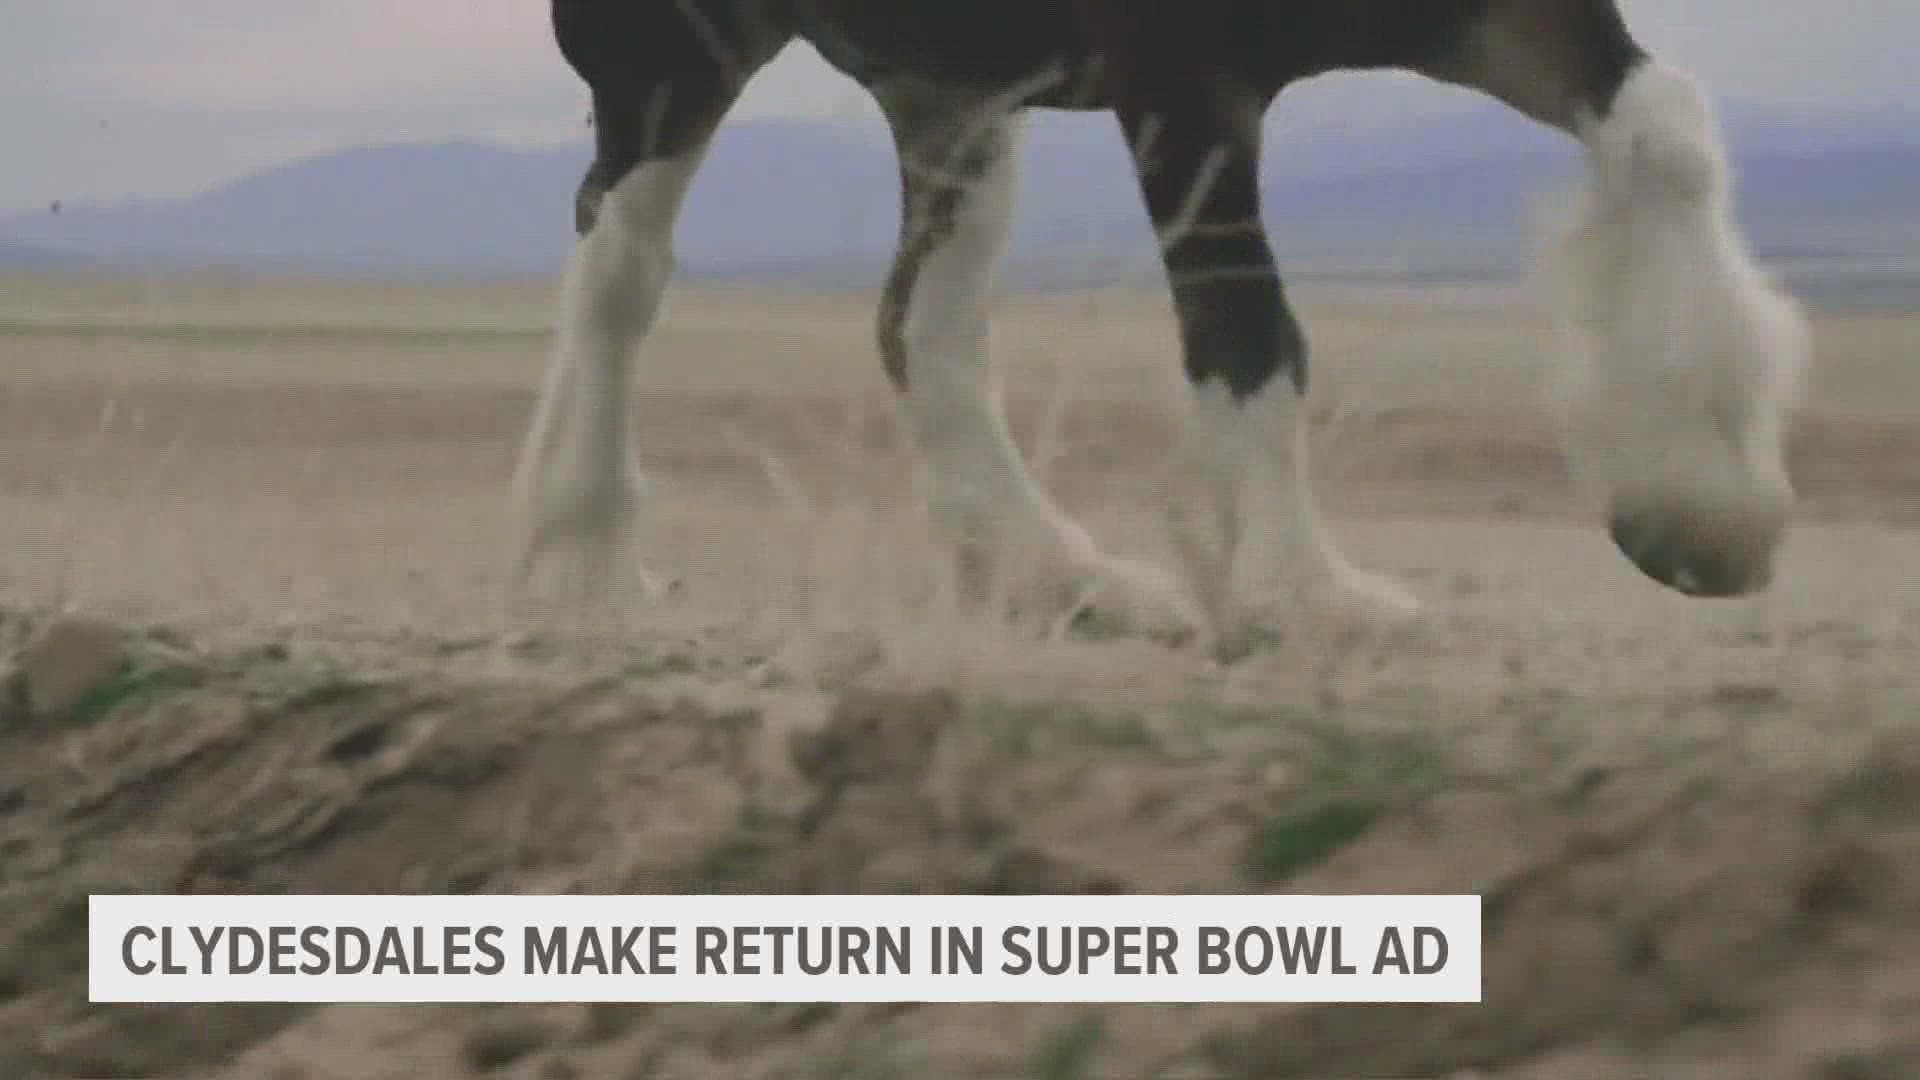 Anheuser-Busch's flagship brand is coming back to the Super Bowl. According to a new teaser, so are the company's iconic Clydesdales.